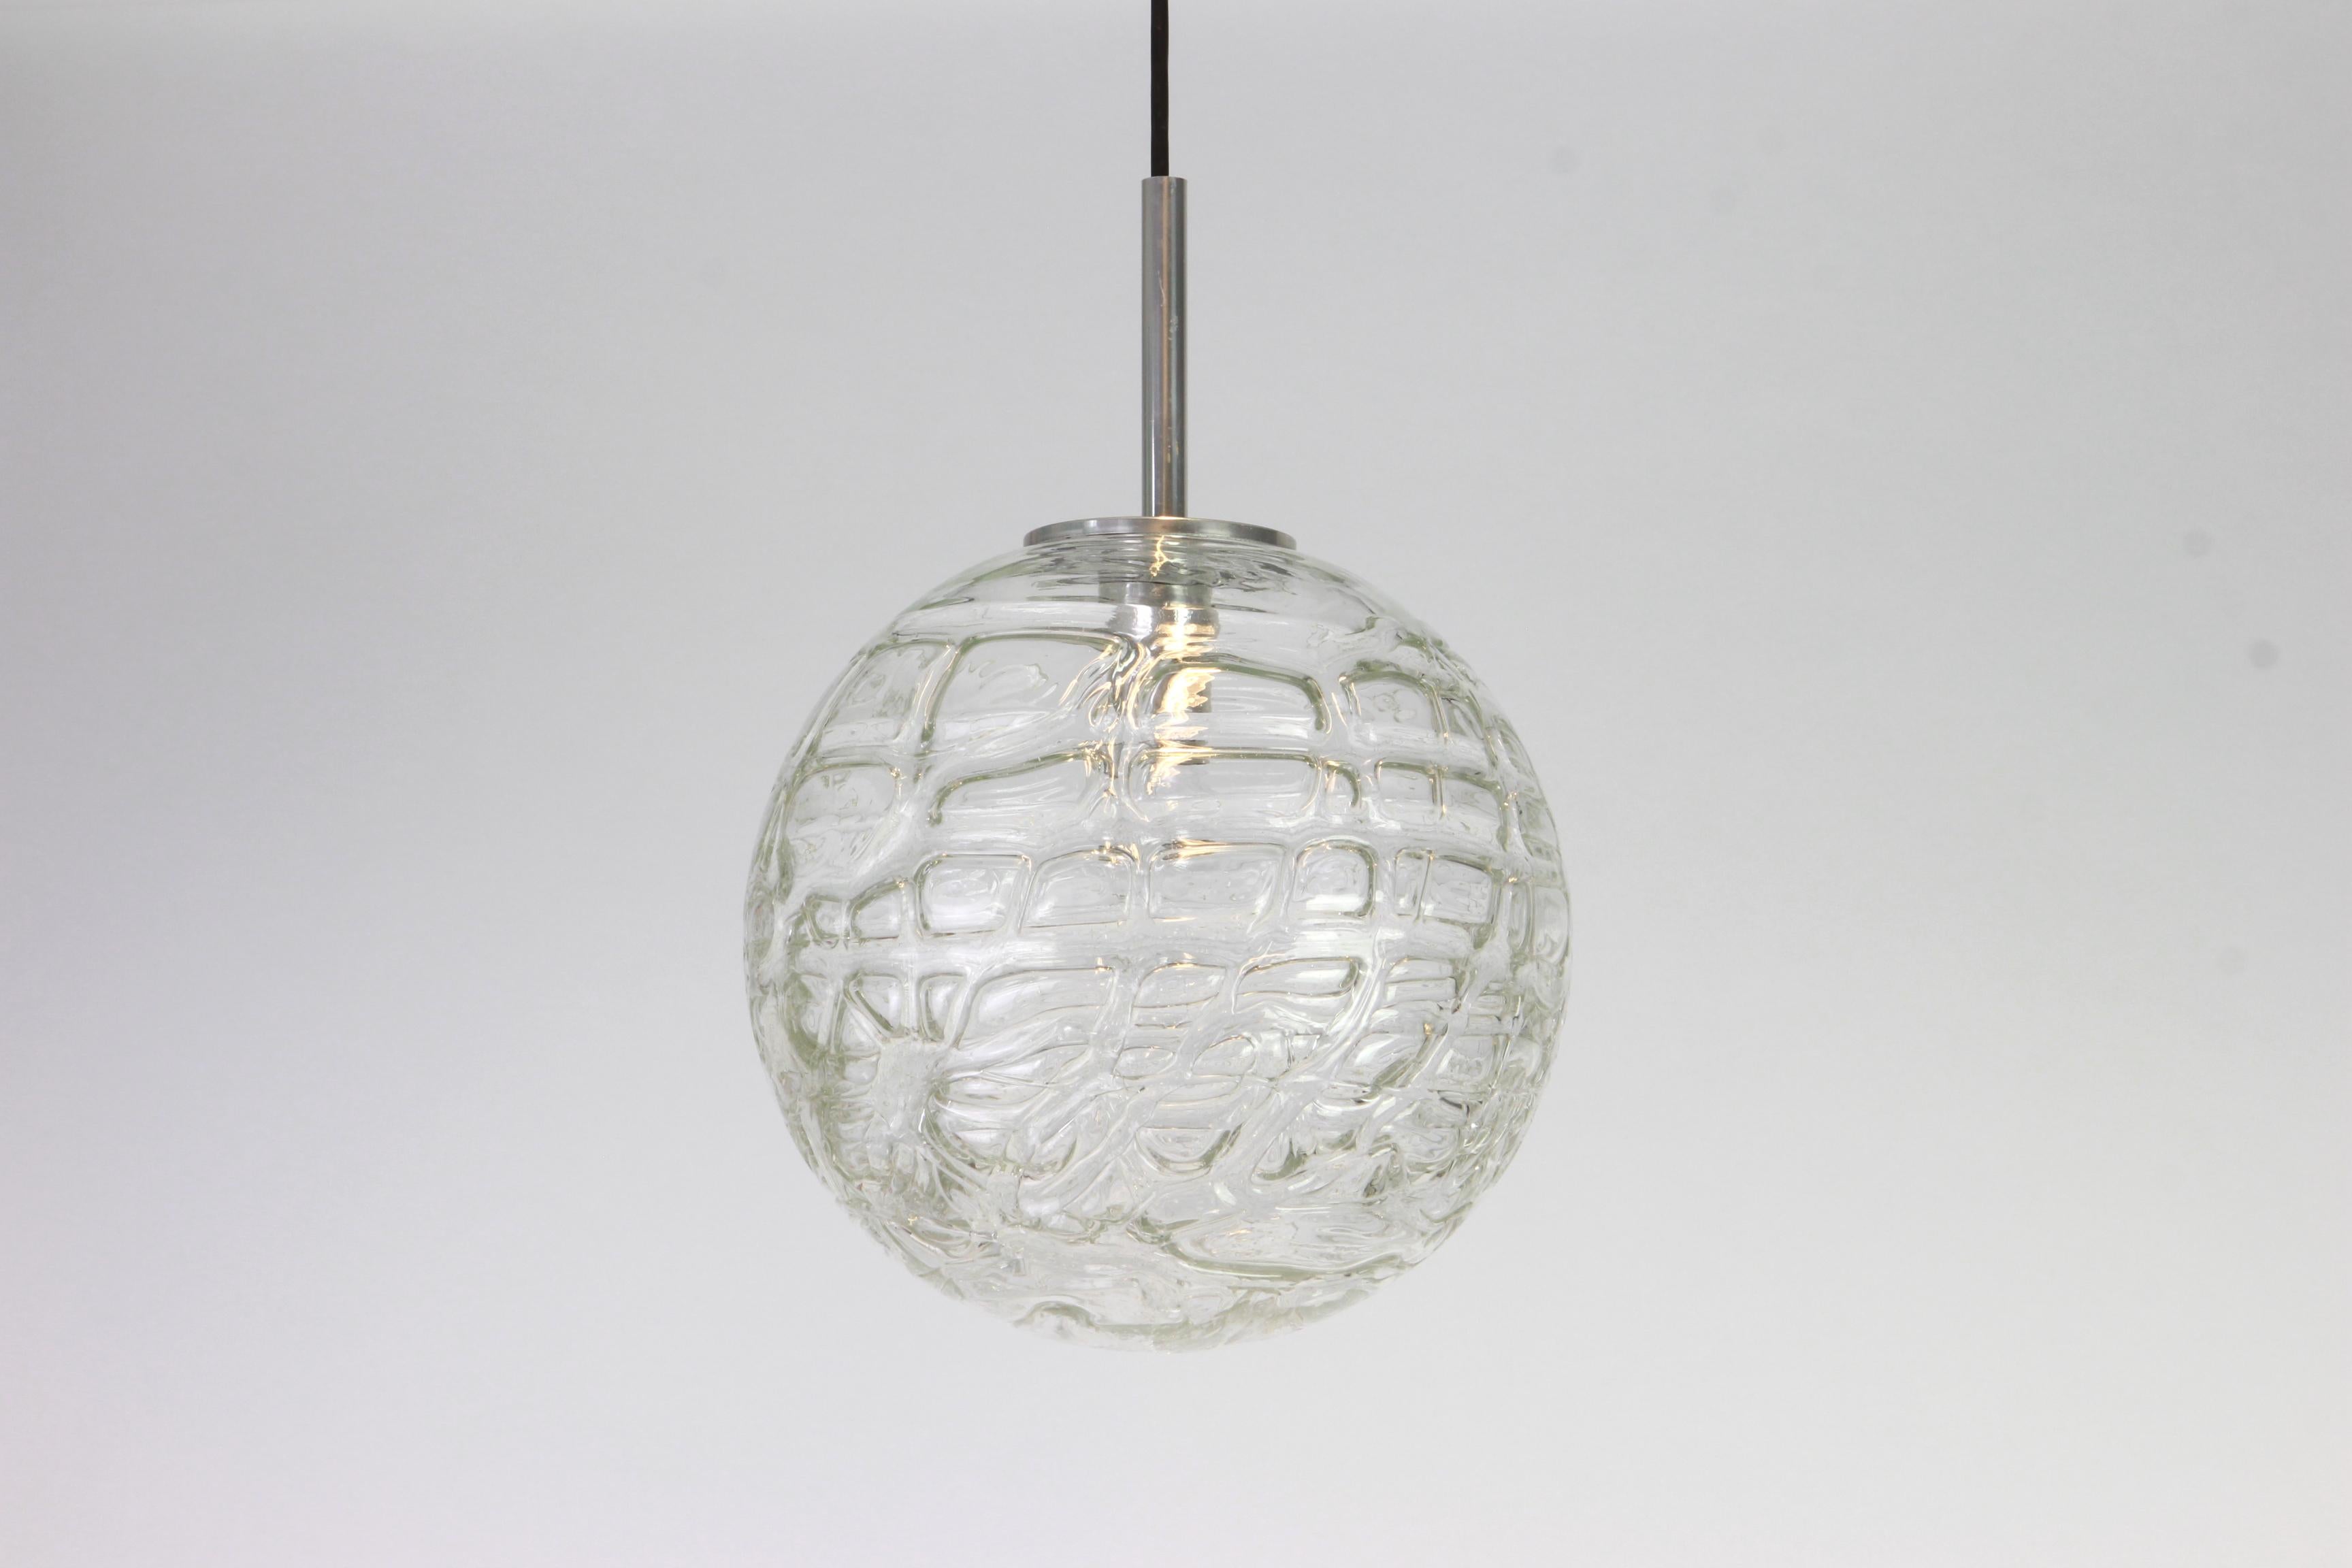 Doria ceiling light with large volcanic Murano glass ball.
High quality of materials - gives a wonderful light effect when it is on.

Sockets: One E27 standard bulbs. Max 80 watt and function on voltage from 110 till 240 volts. (For USA, UK